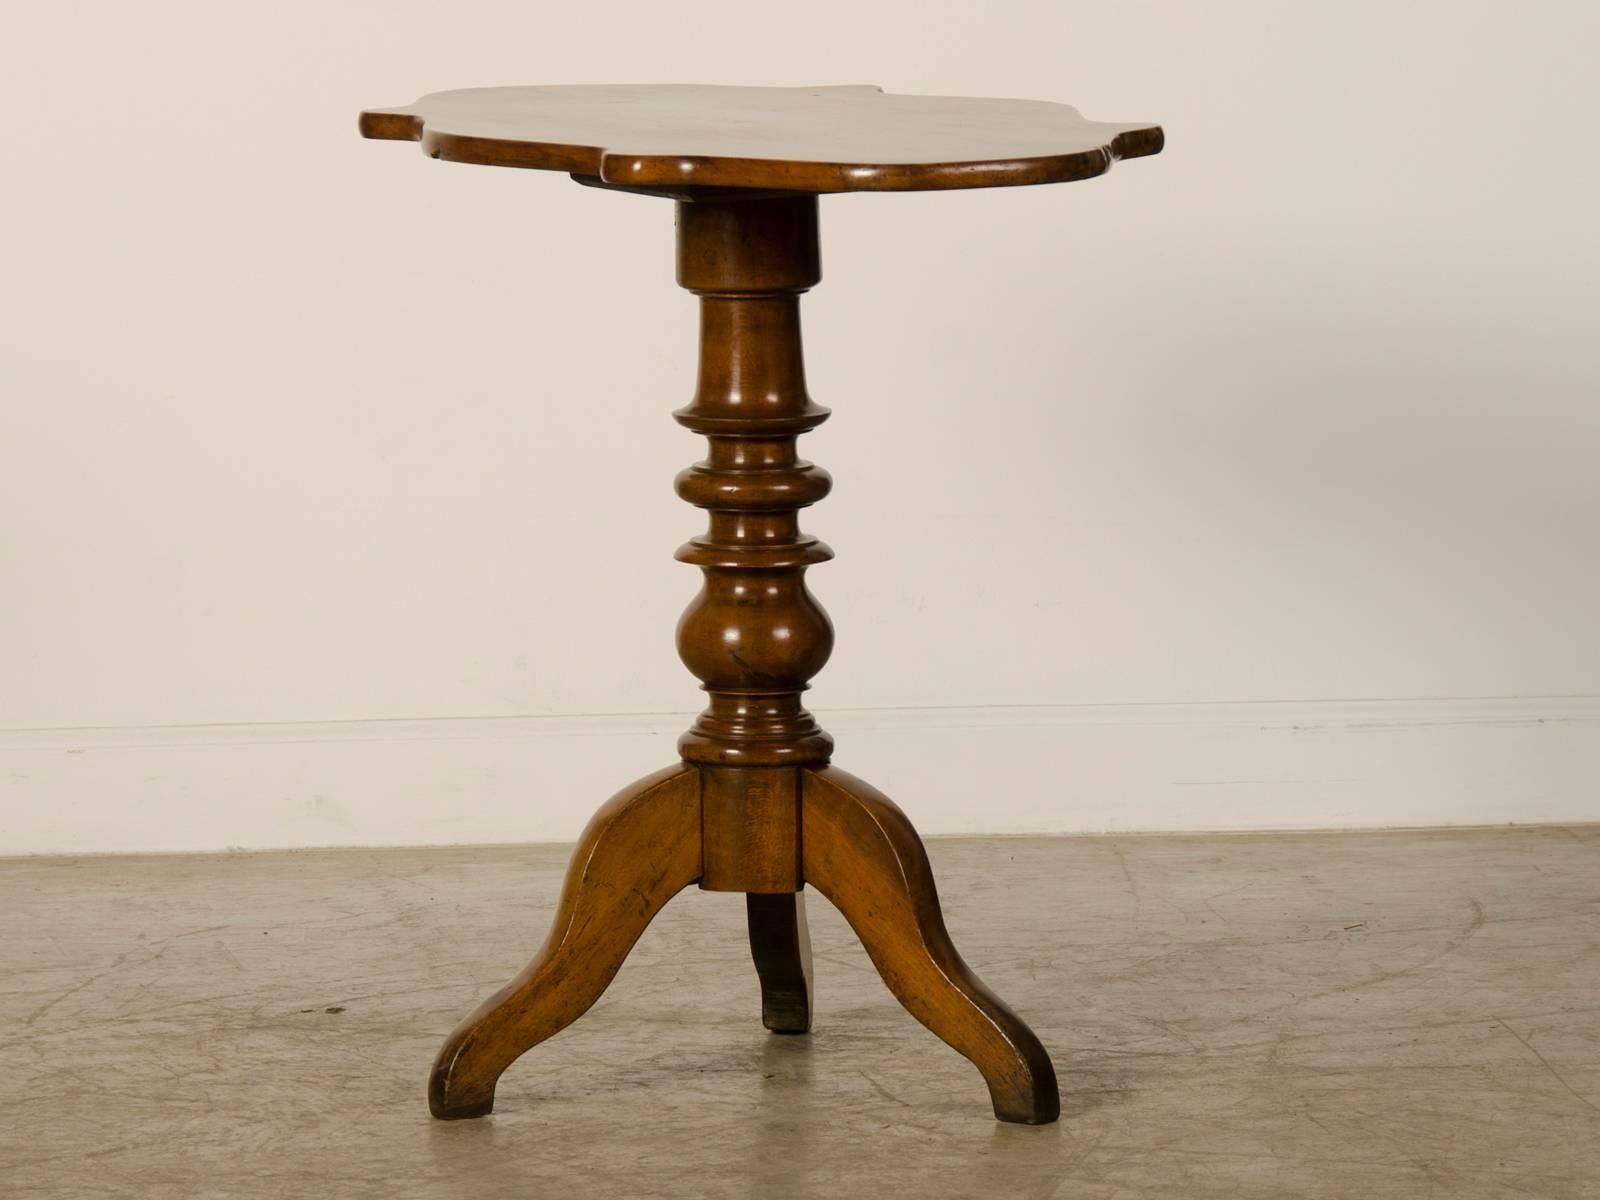 Antique English Oval Mahogany Pedestal Table, circa 1860 For Sale 1